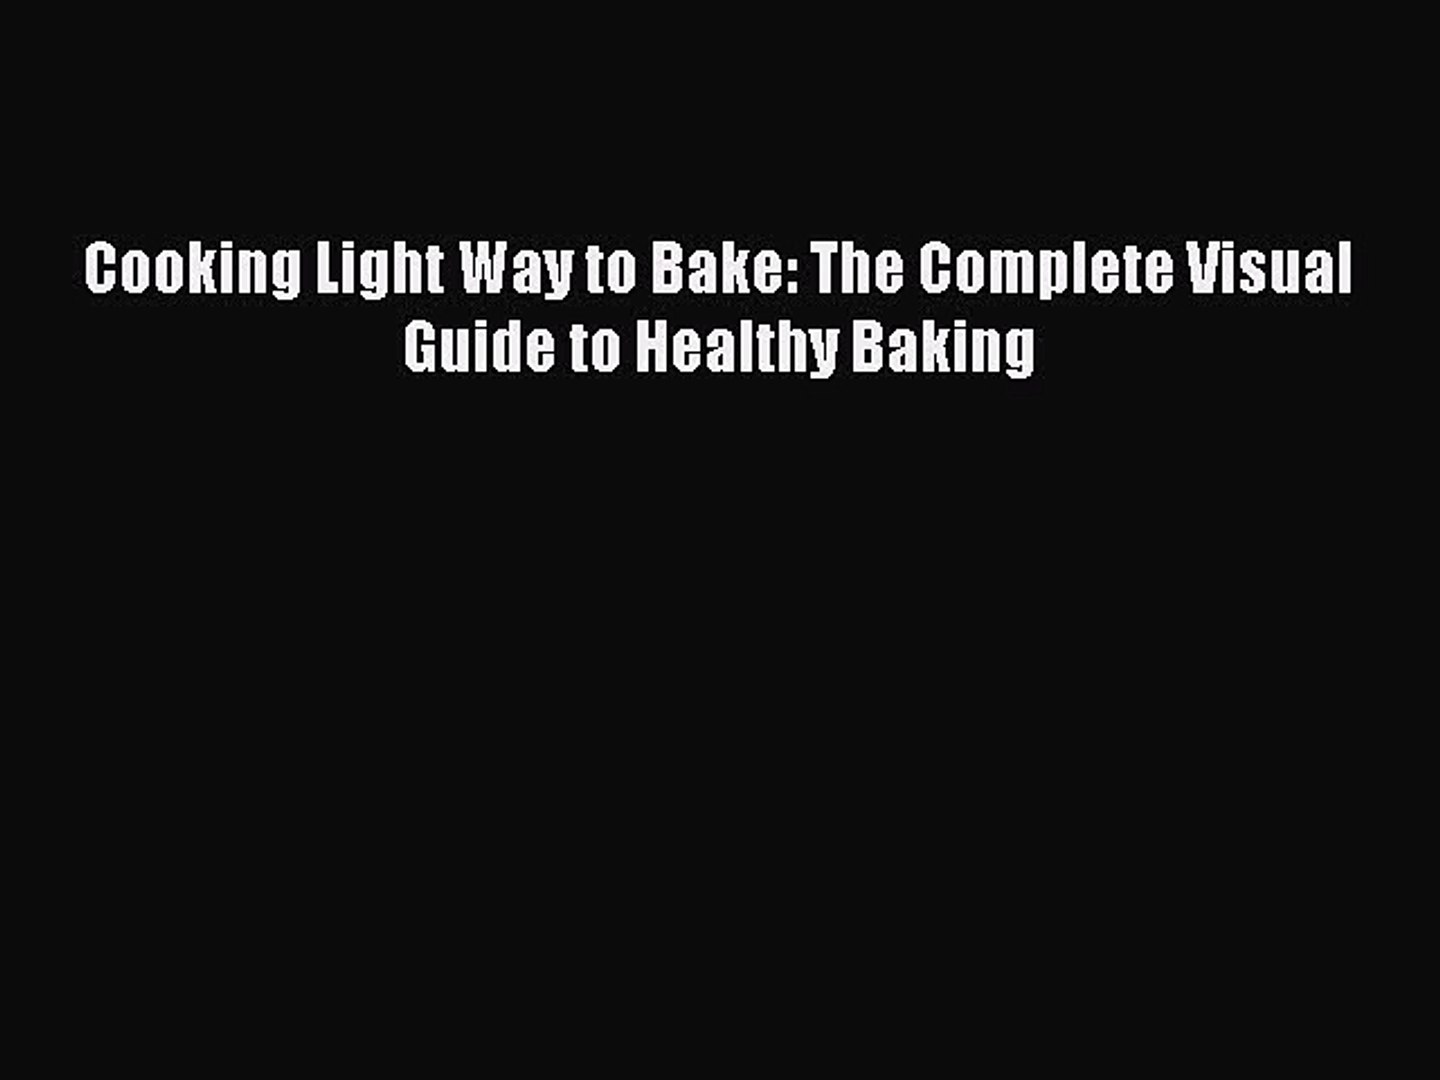 Download Cooking Light Way to Bake: The Complete Visual Guide to Healthy Baking  EBook